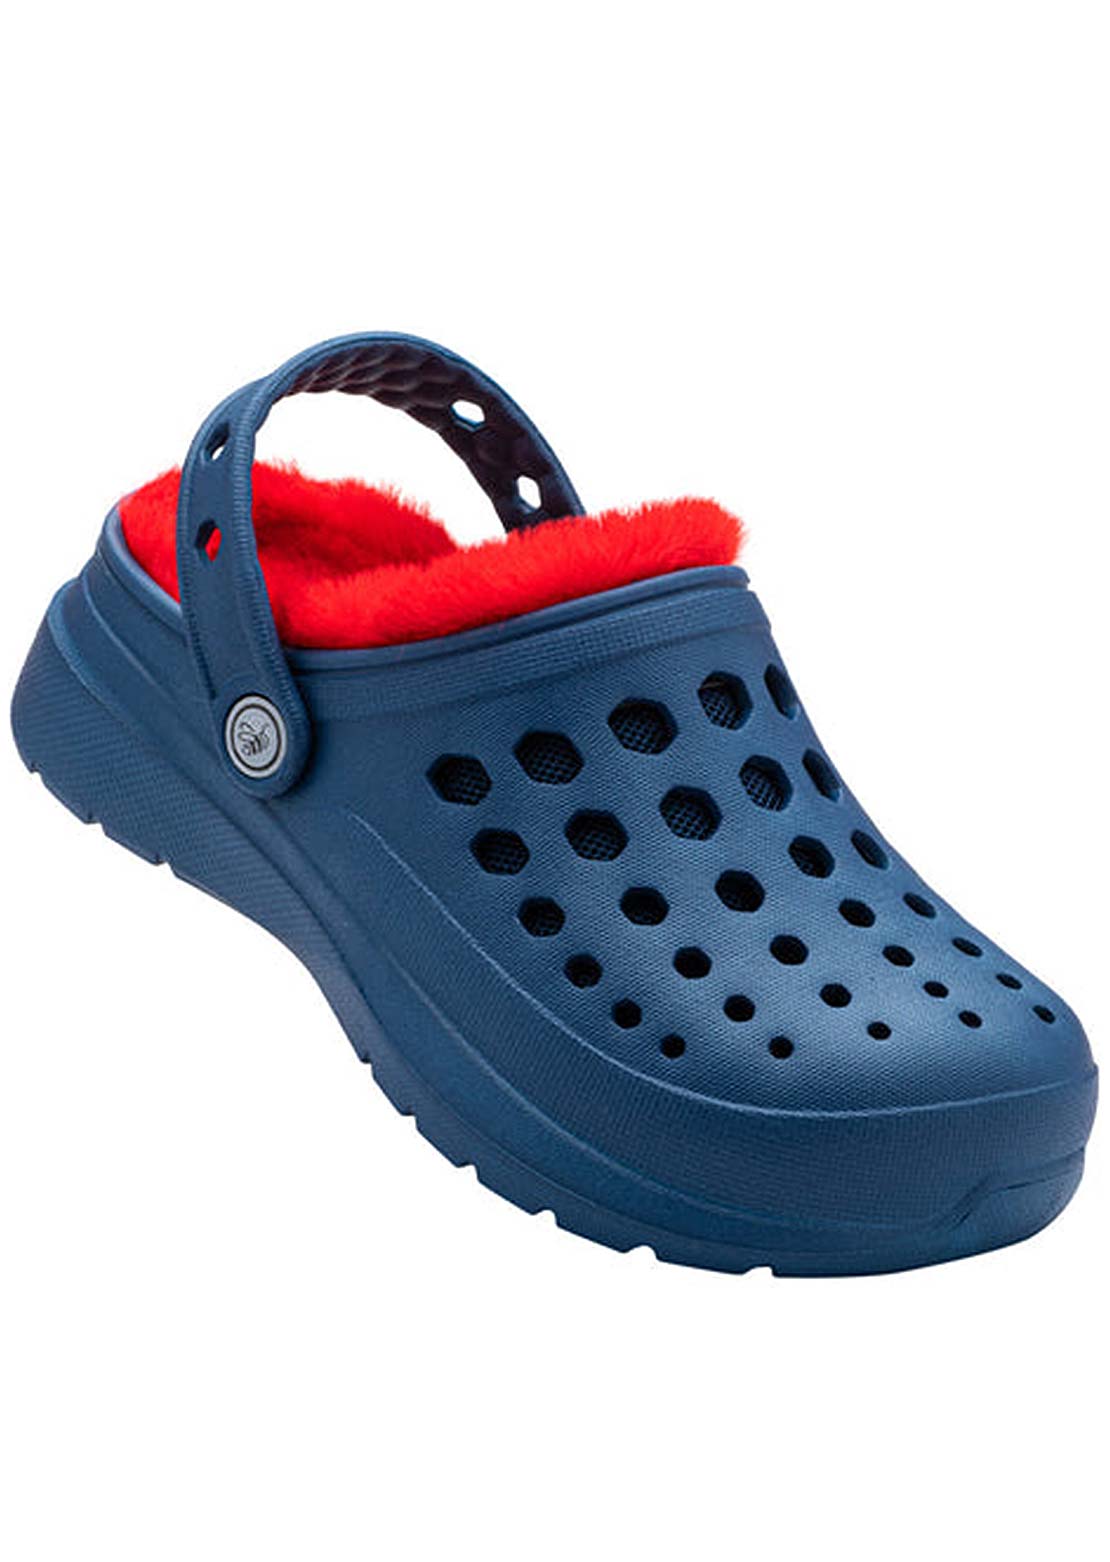 Joybees Toddler Cozy Lined Clogs Navy/red